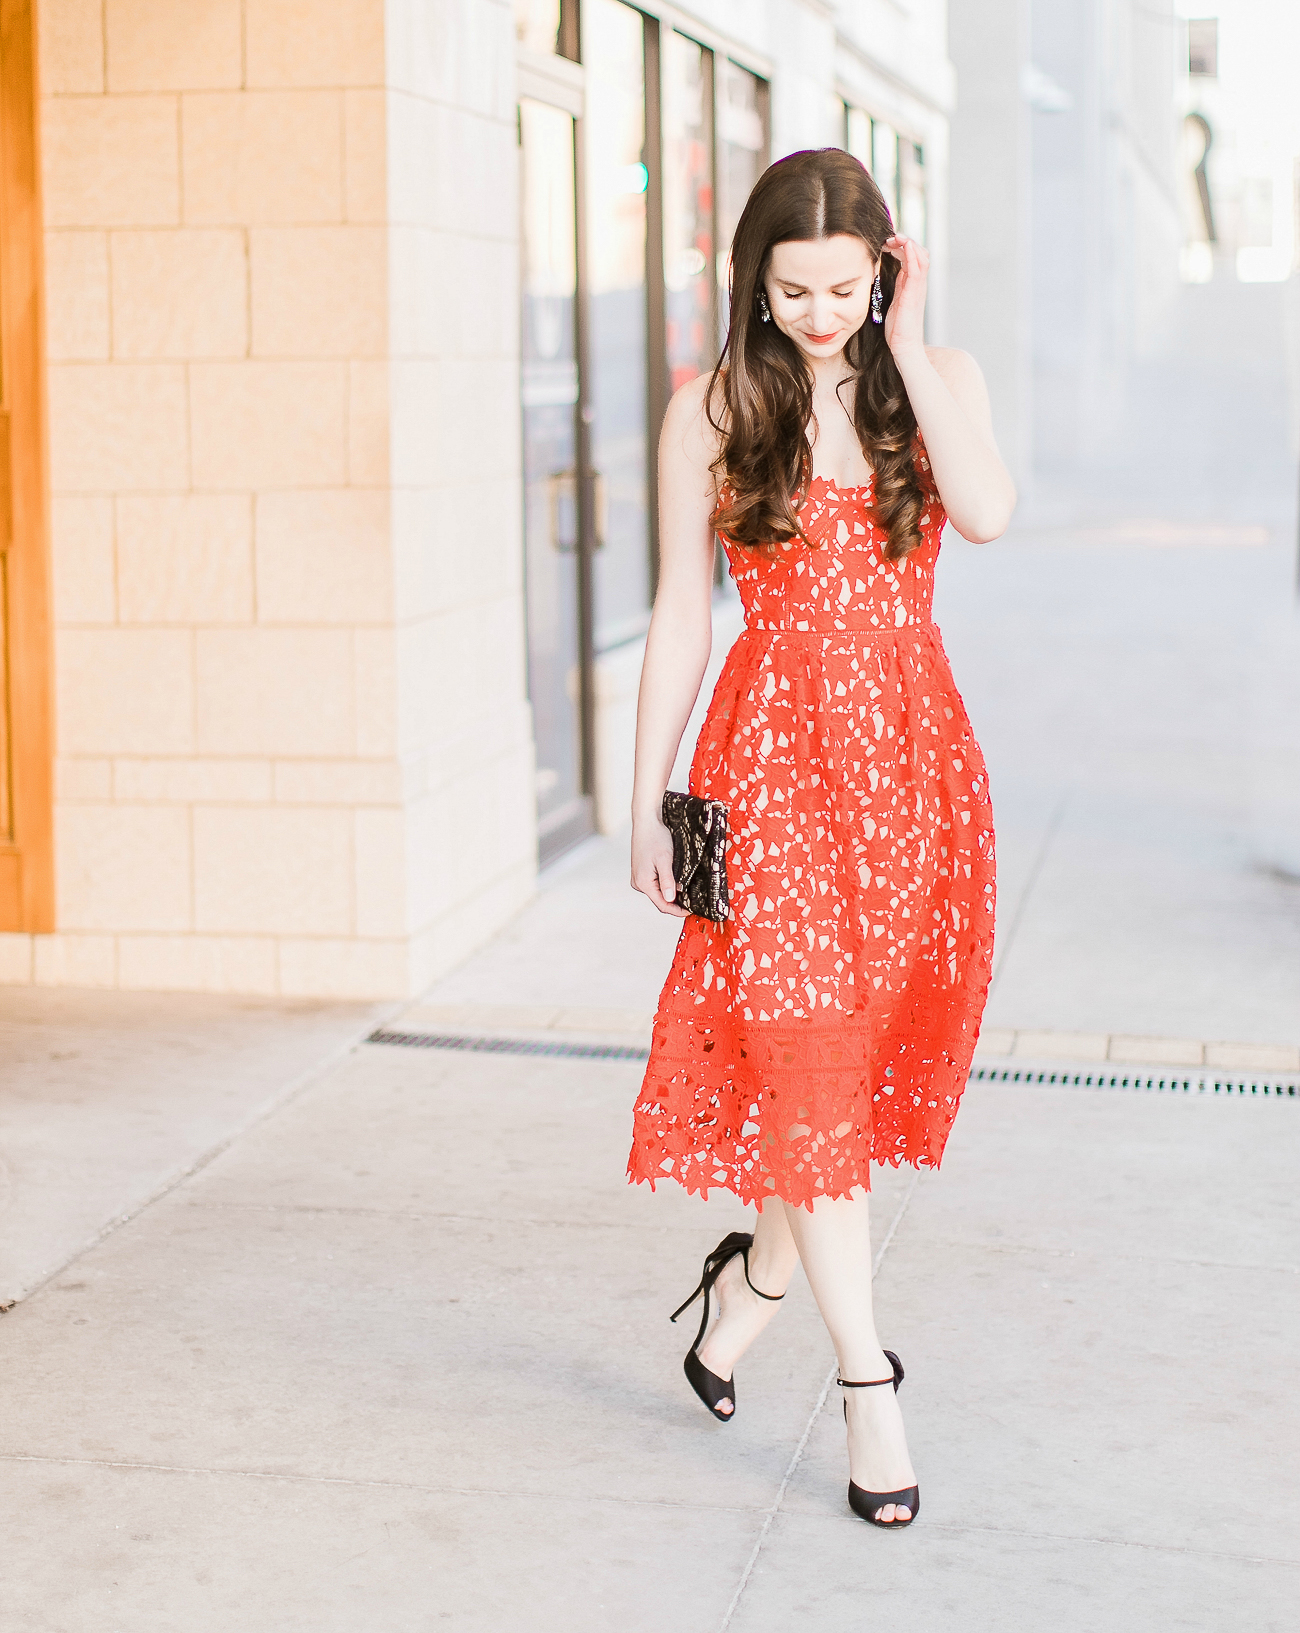 How to enjoy Valentine's Day as a single gal by fashion blogger Stephanie Ziajka from Diary of a Debutante, what to do on Valentine's Day when you are single, how to spend Valentine's Day alone | Shein red lace fit and flare dress with Nina black bow ankle pumps and Jessica McClintock black lace envelope clutch